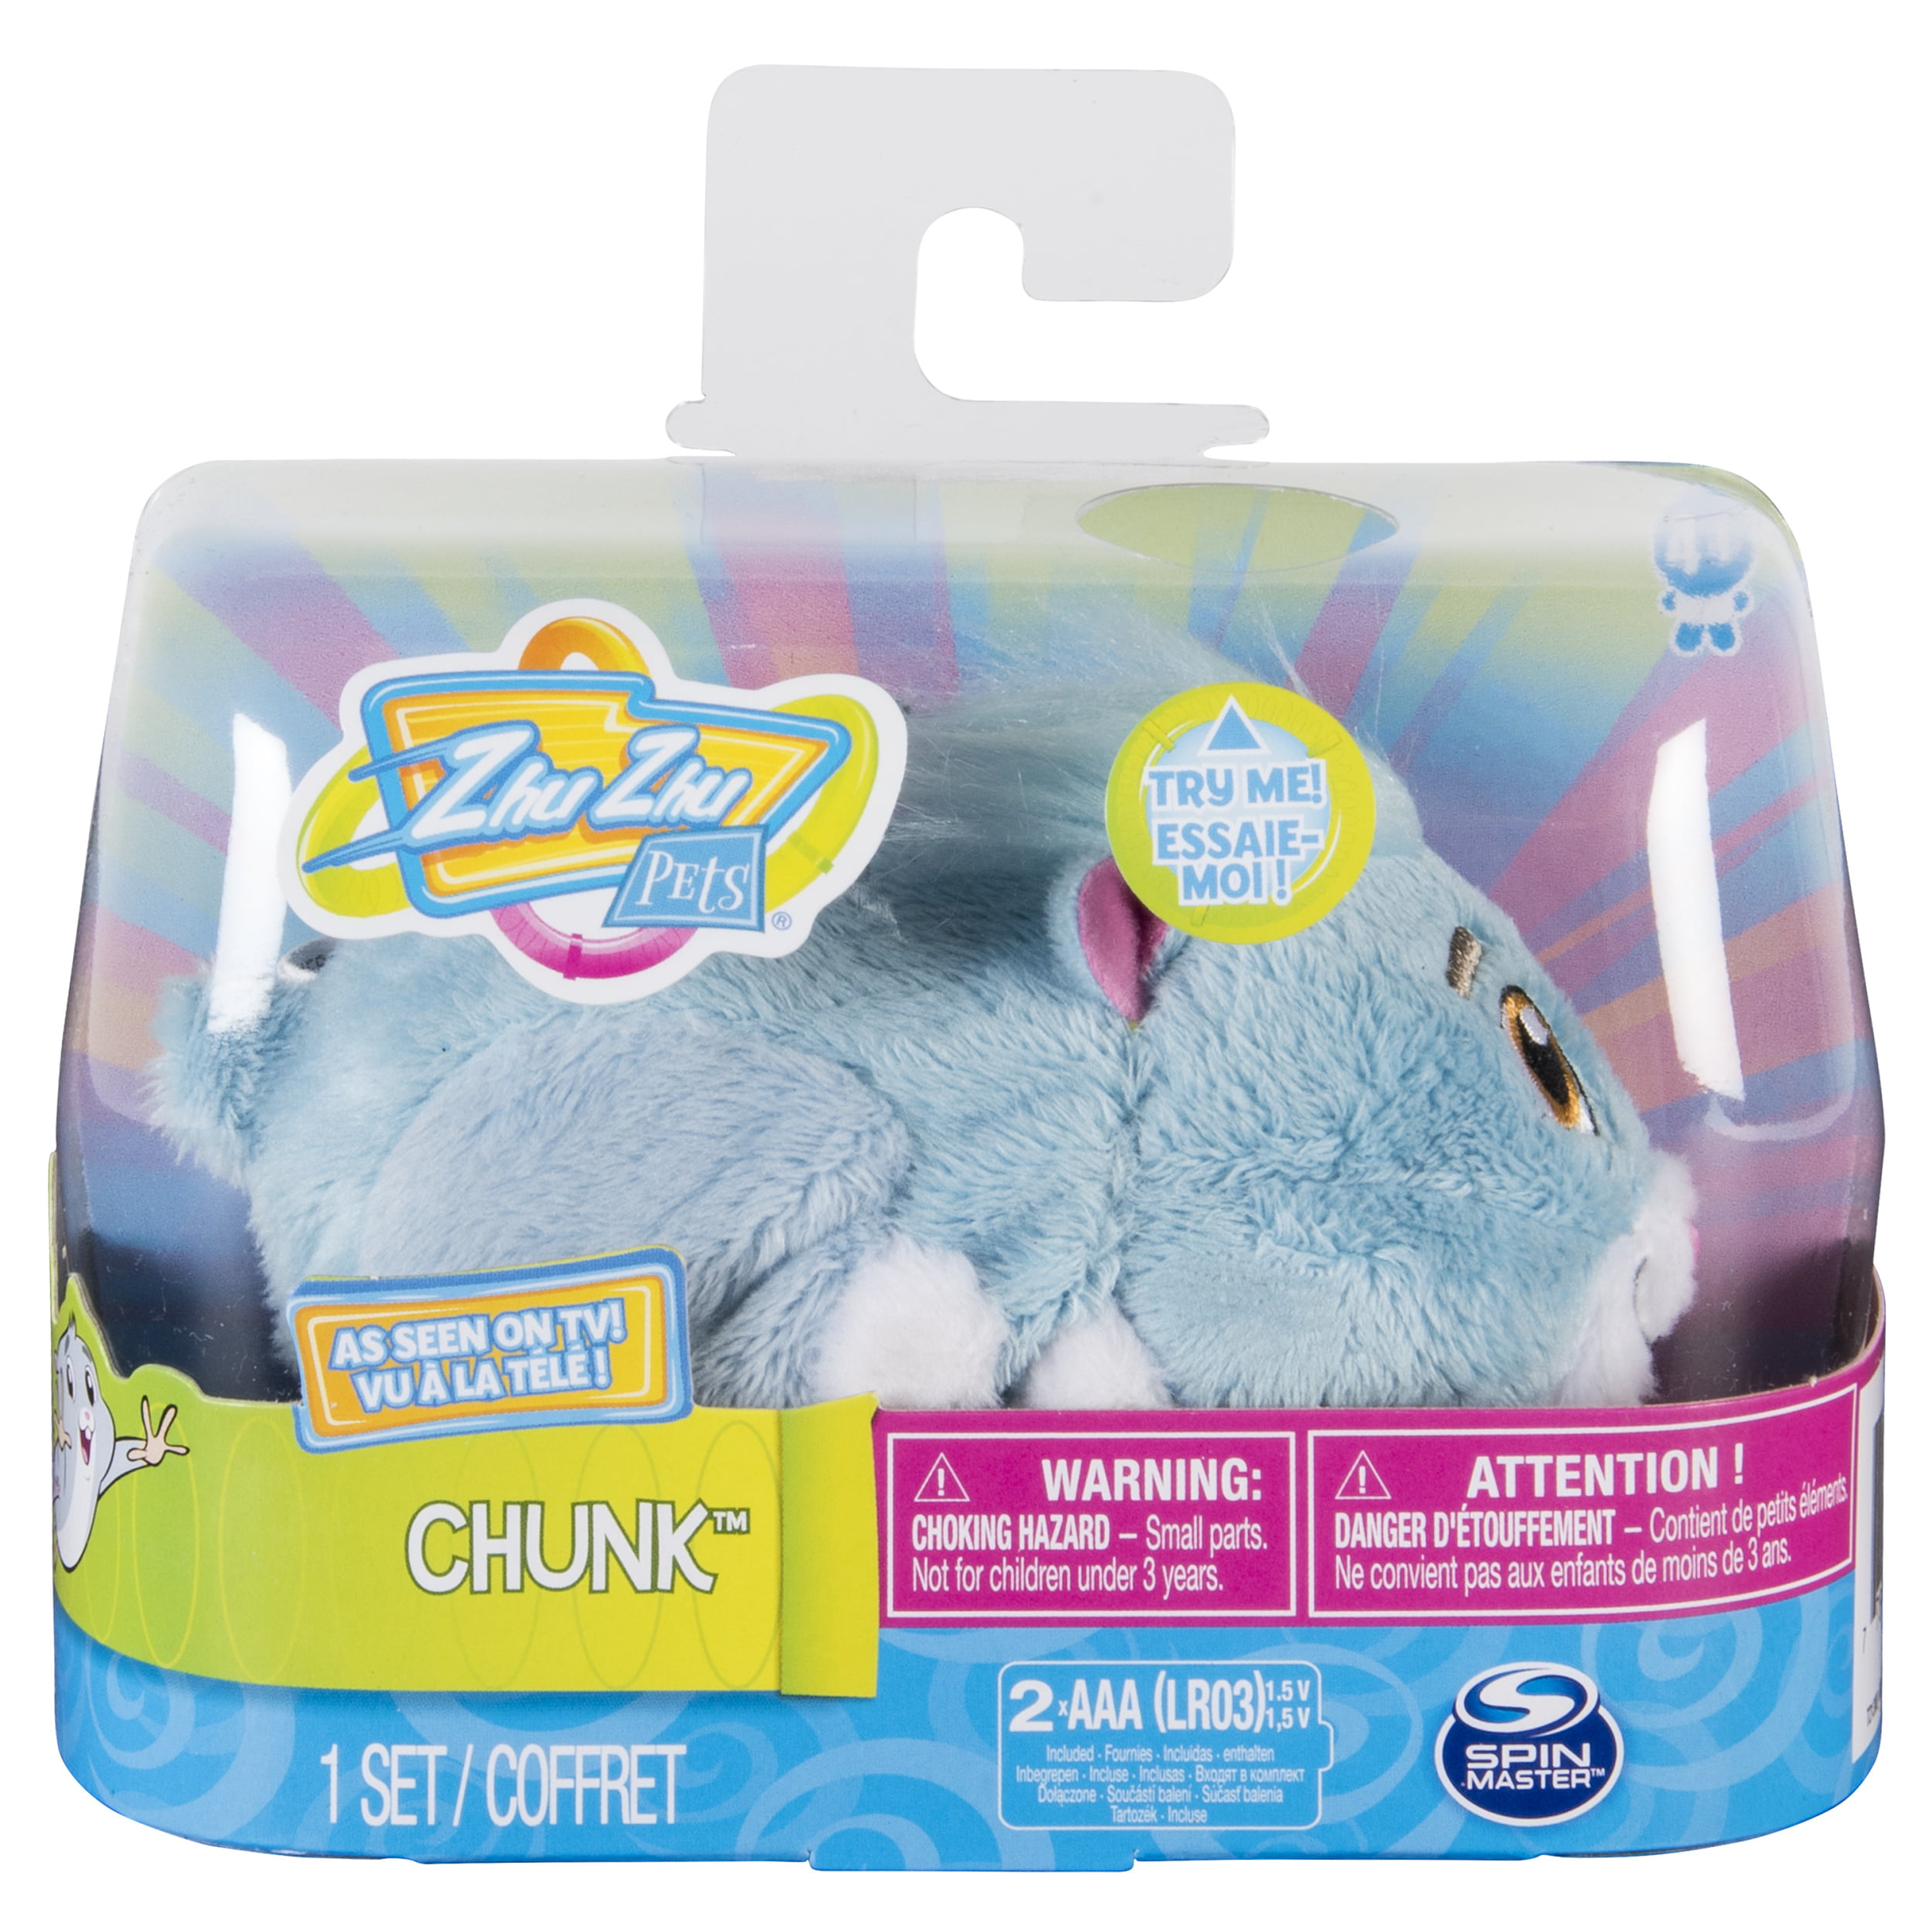 Zhu Zhu Pets Chunk Blue toy Hamster Brand new and boxed electronic toy 